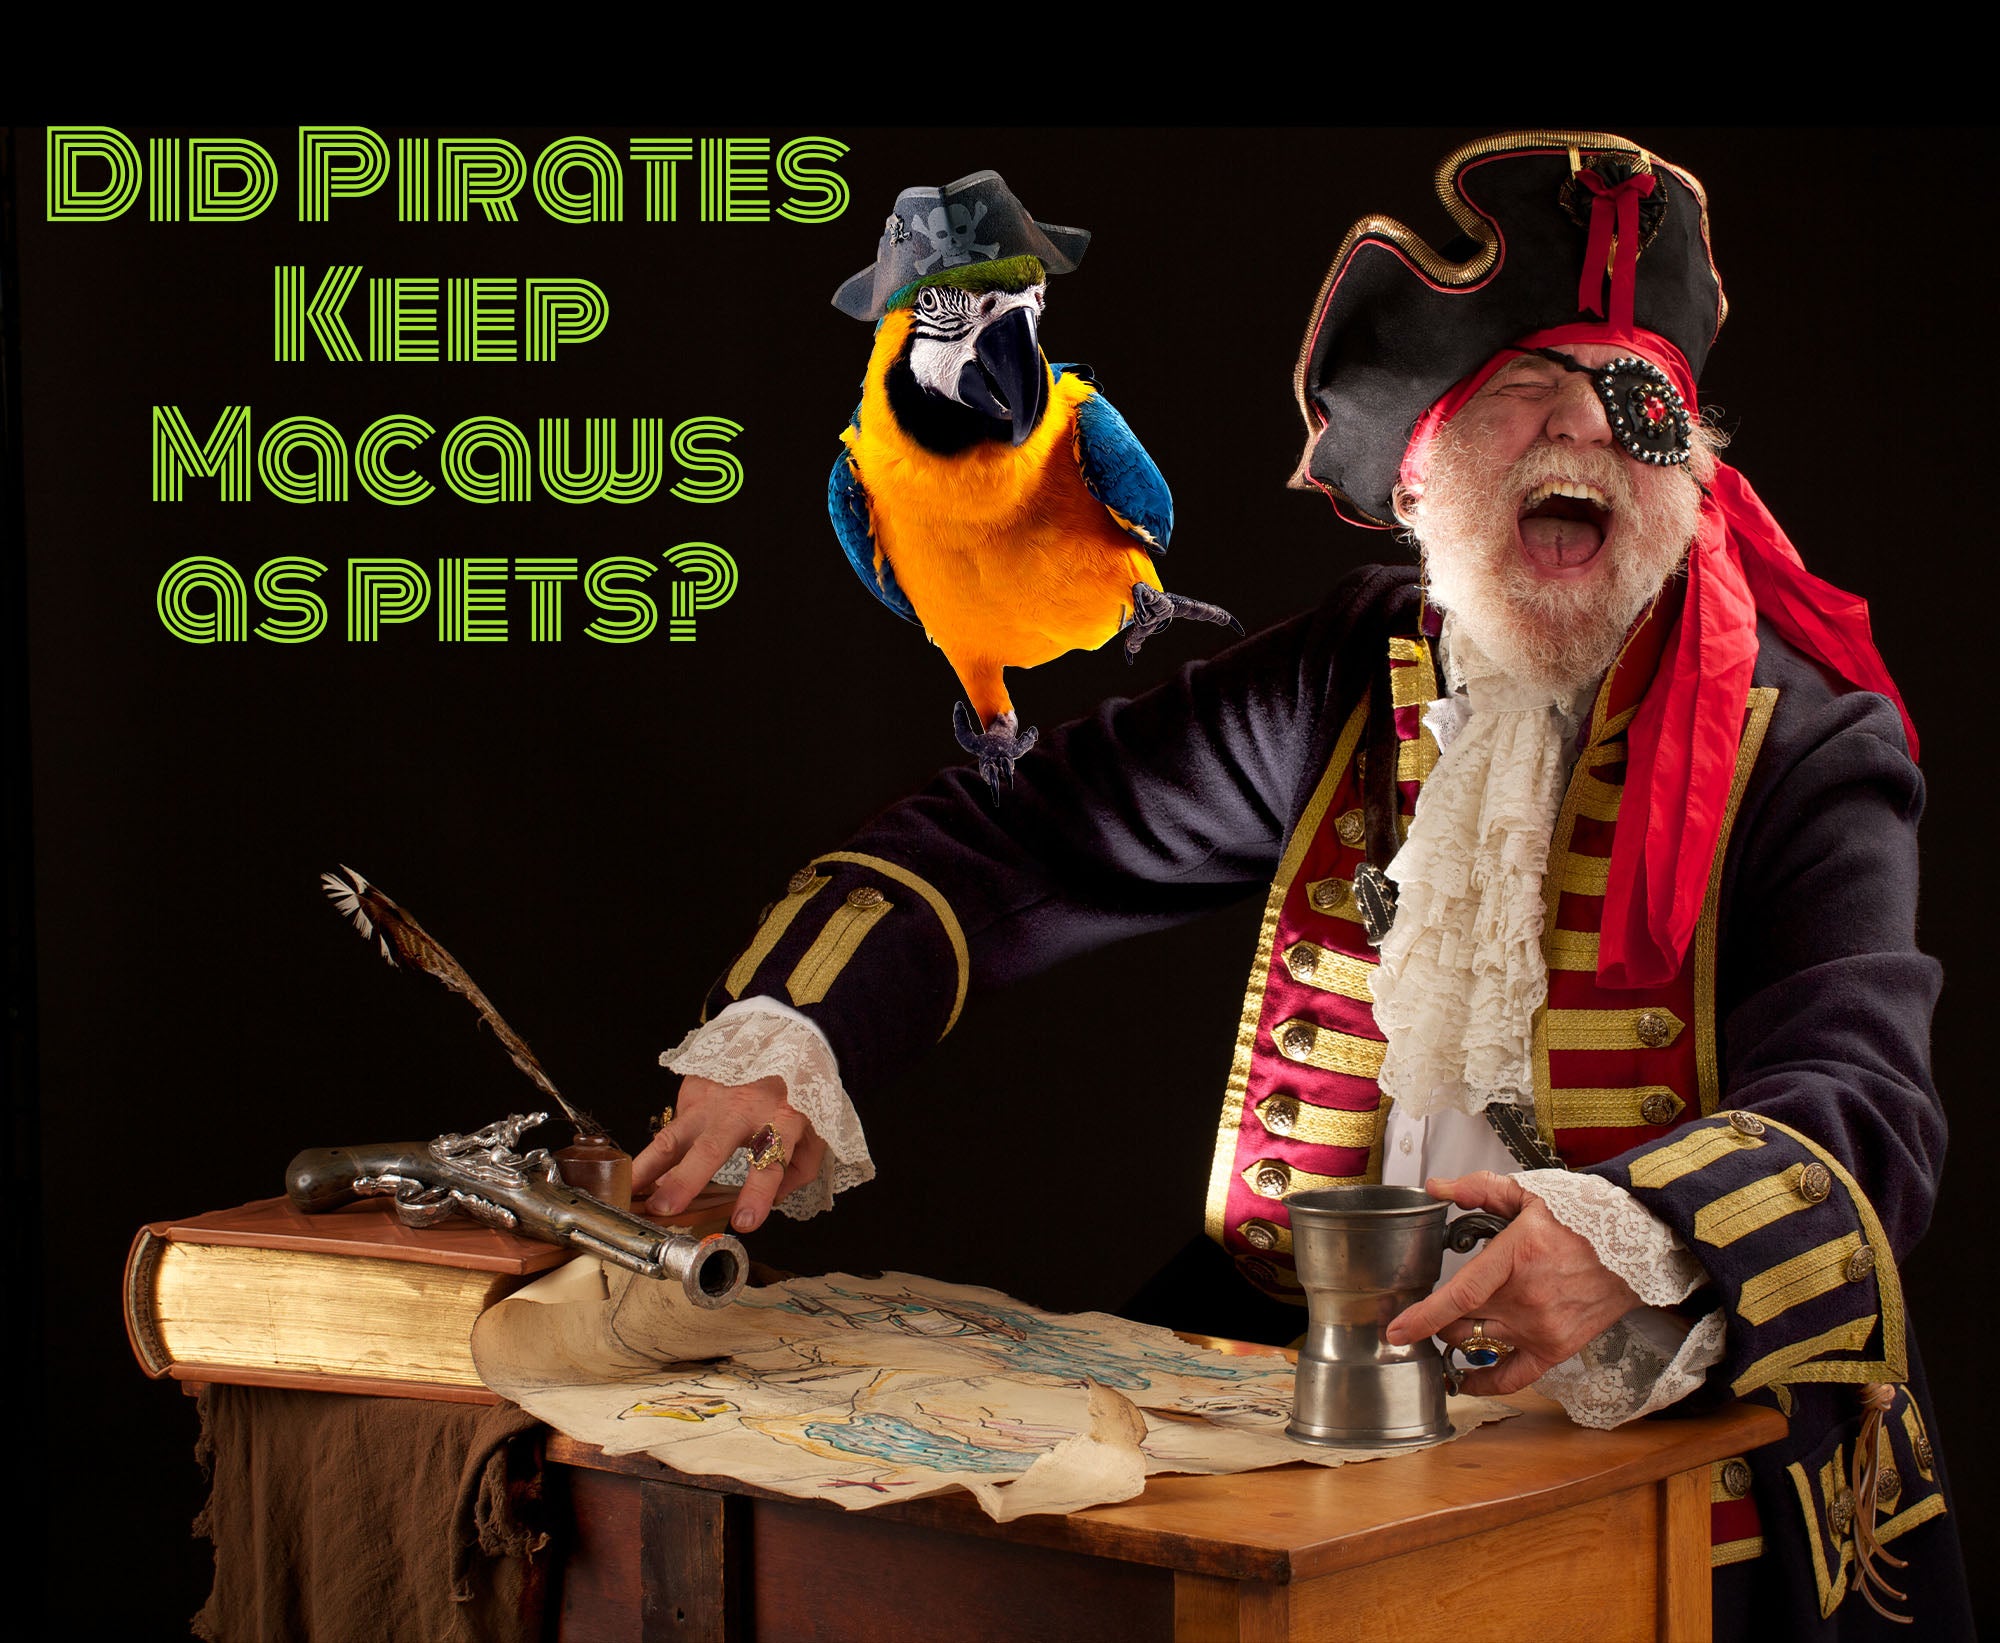 Did pirates in the past keep macaws as pets?